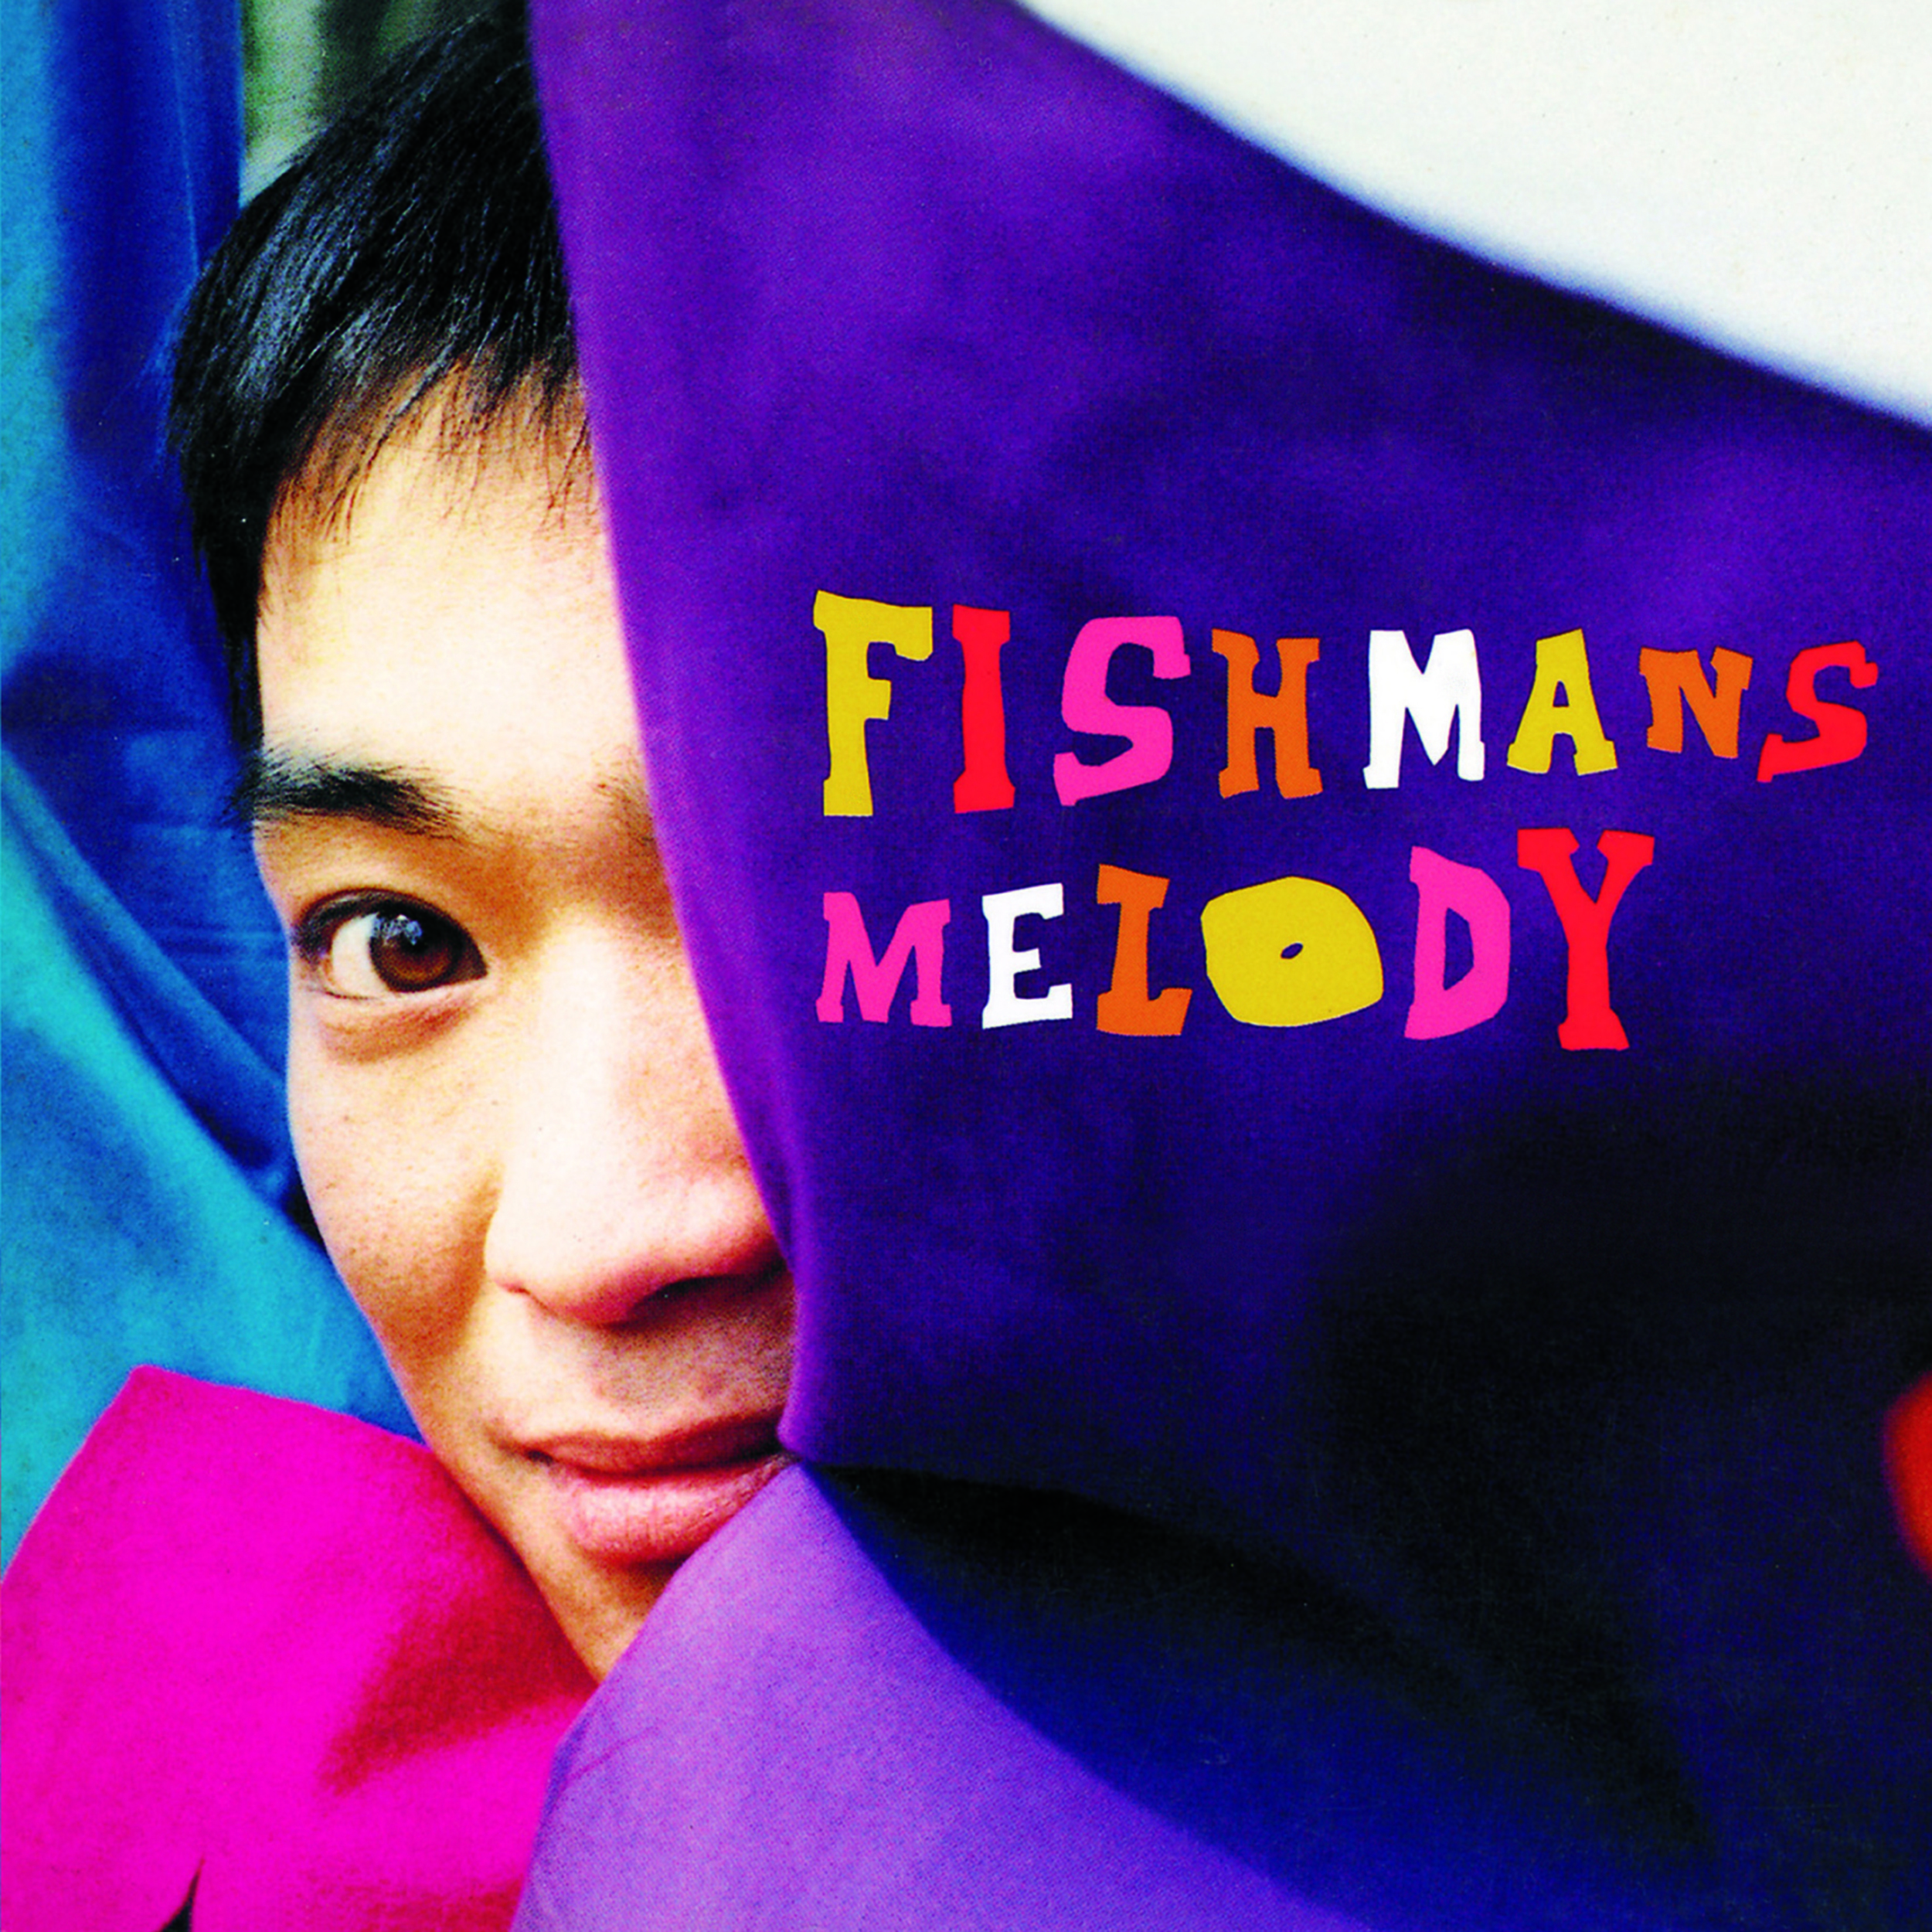 Fishmans "MELODY" (180g heavyweight vinyl) Single-disc Release on March 30th 2022